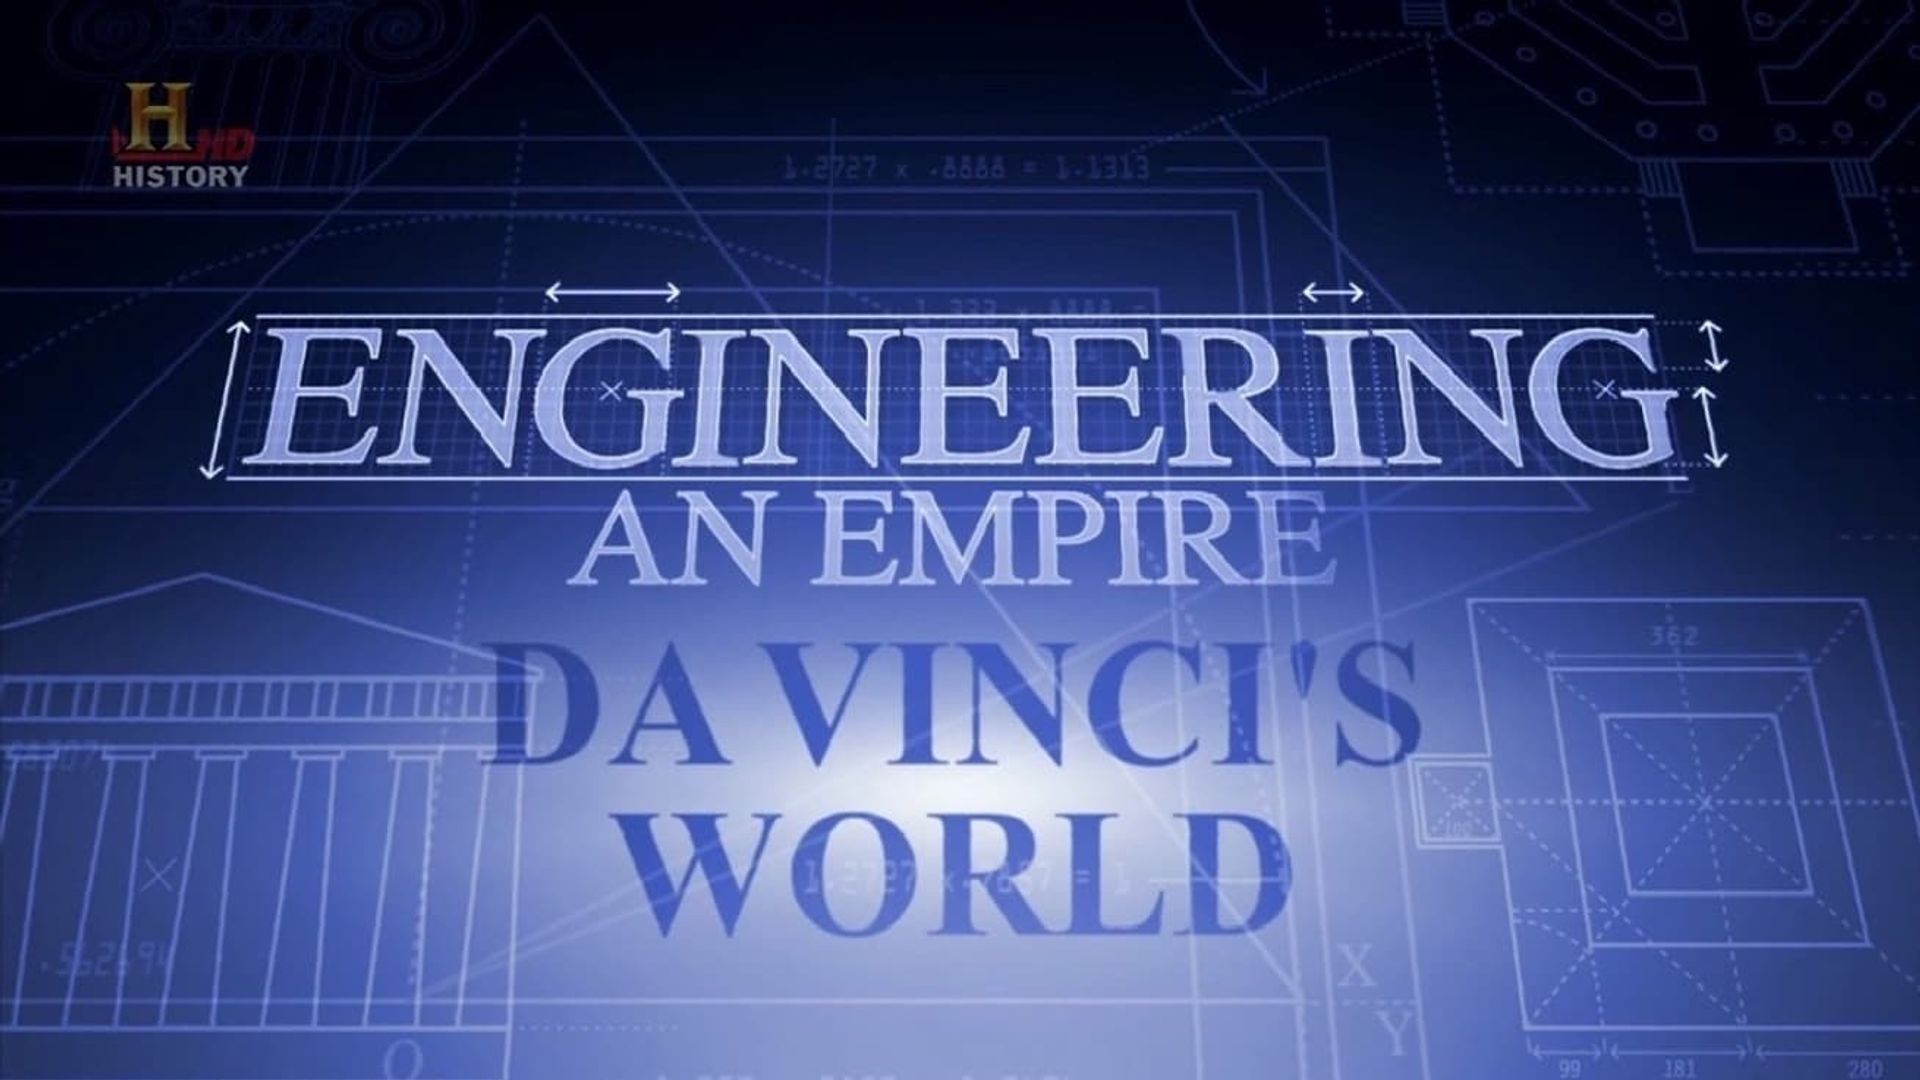 Engineering an Empire background